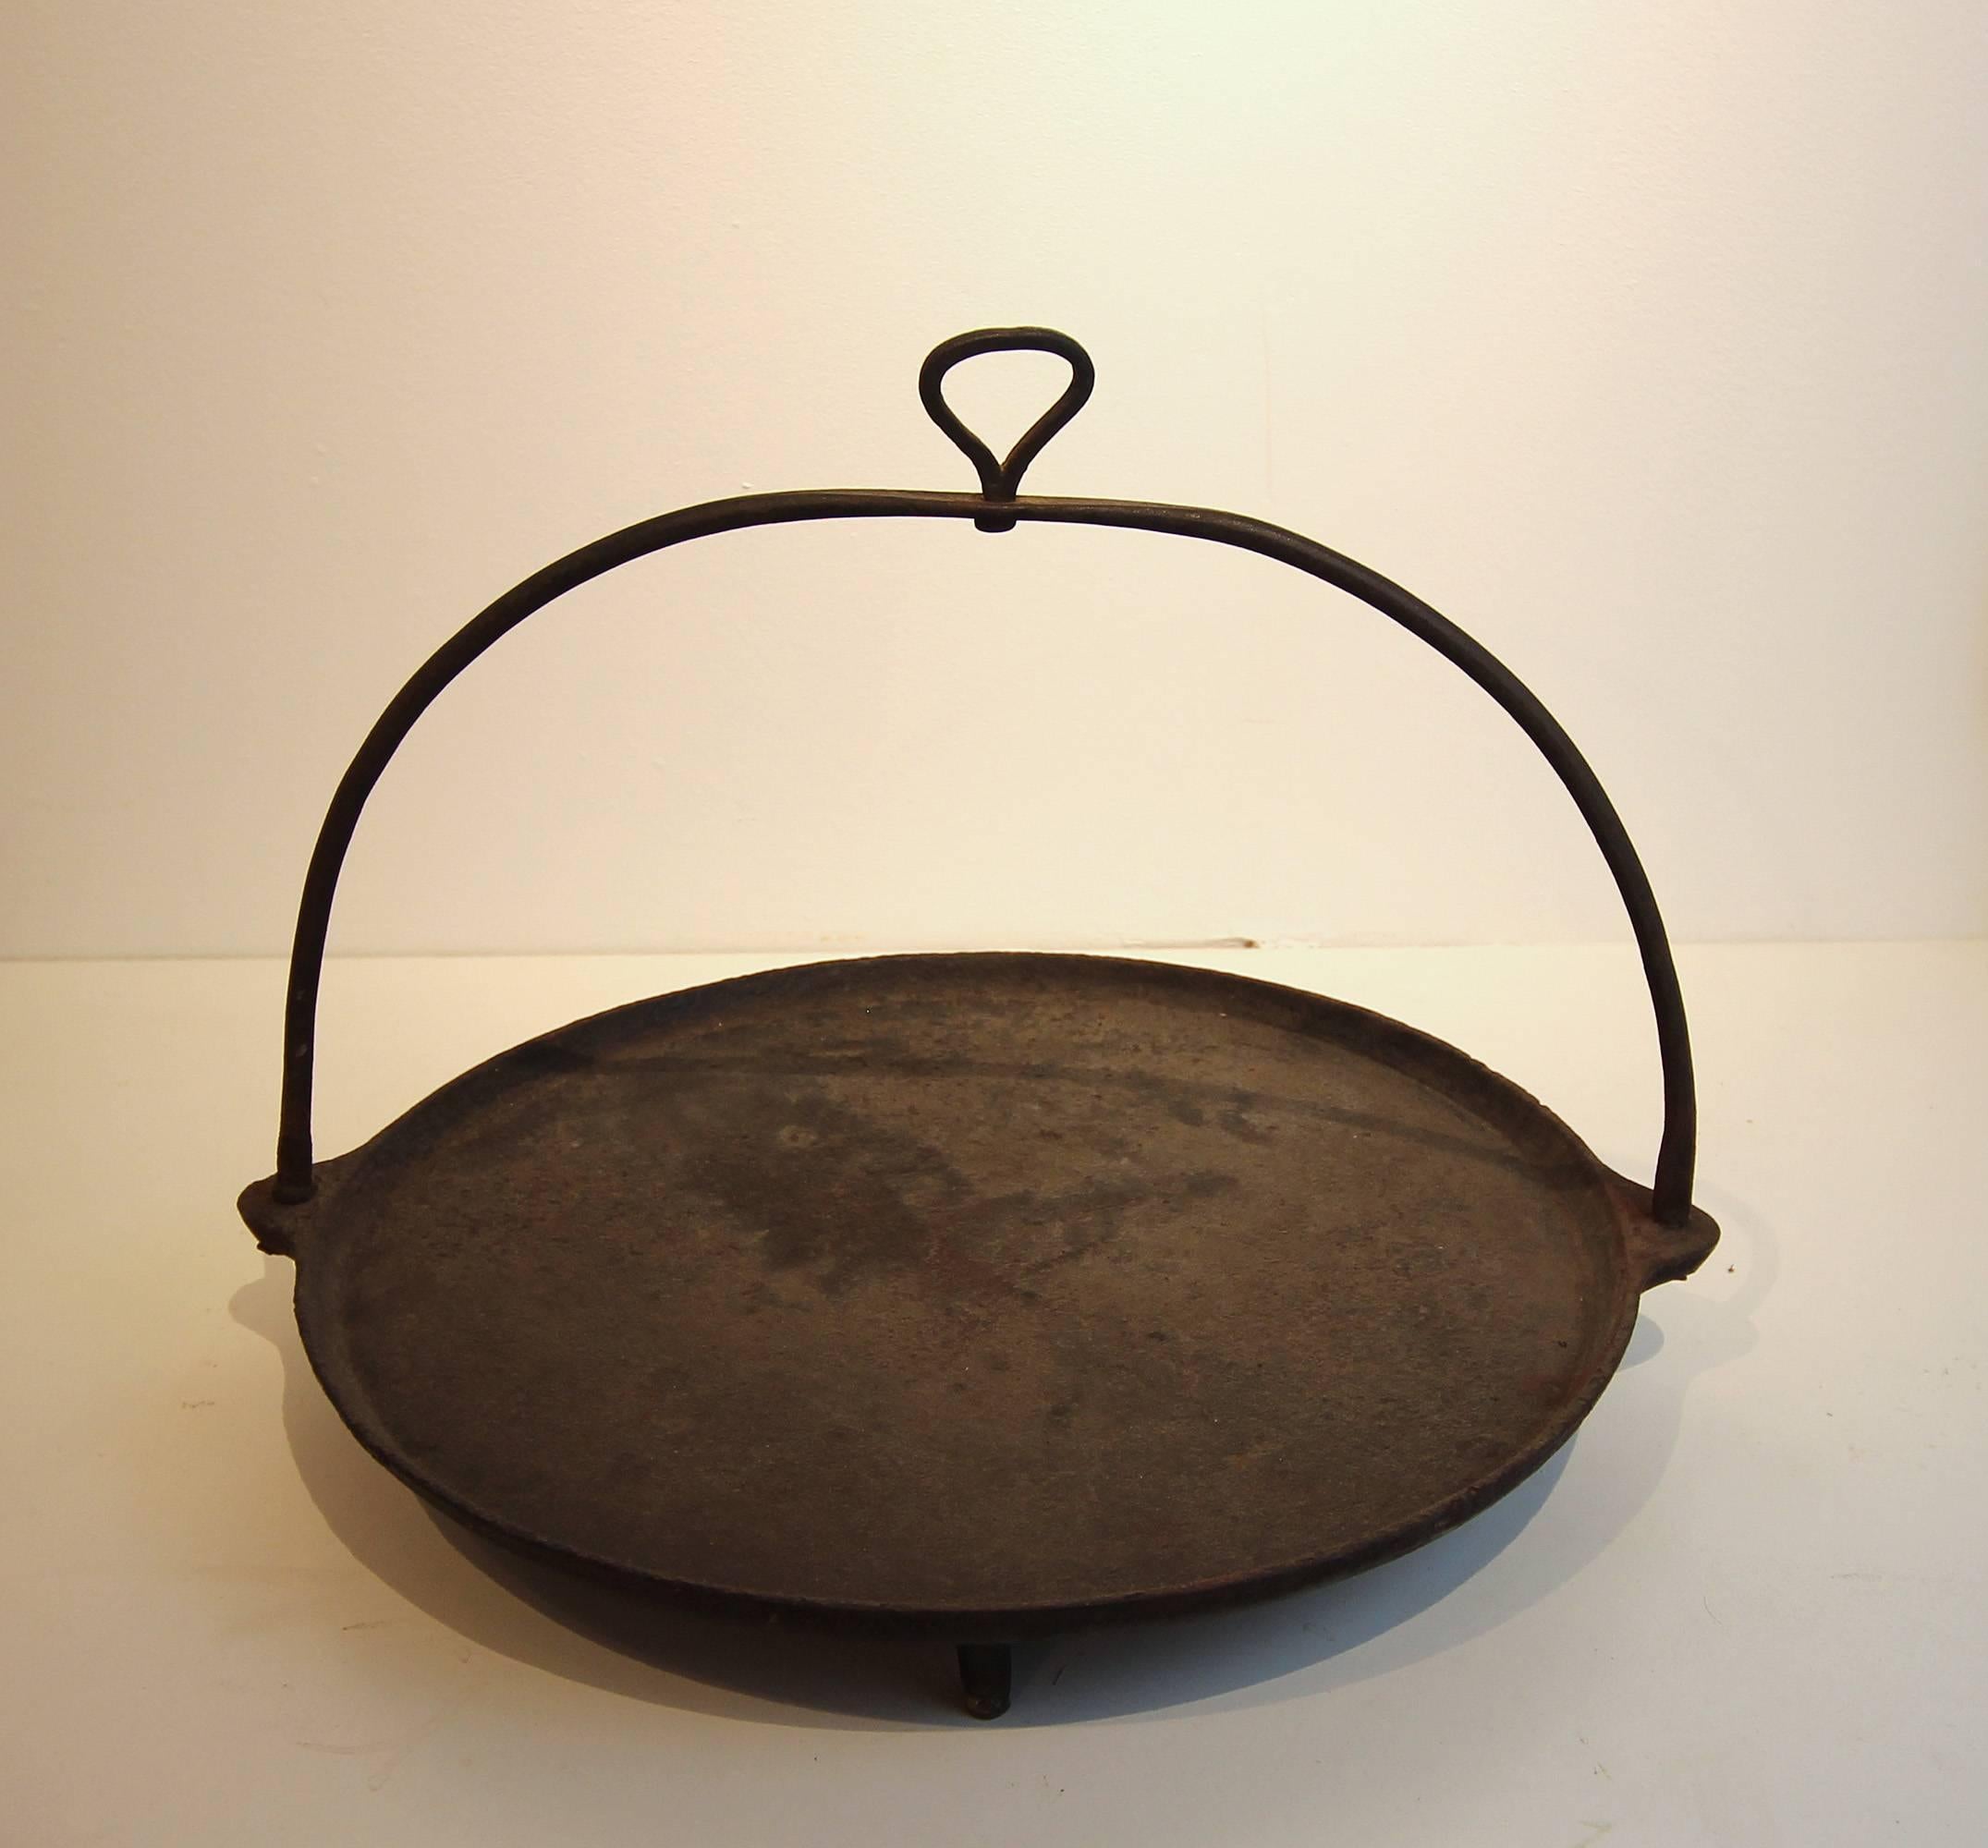 Hanging fireplace skillet with feet, cast iron, would make an excellent tabletop item in the kitchen or dining room, American, late 19th century.